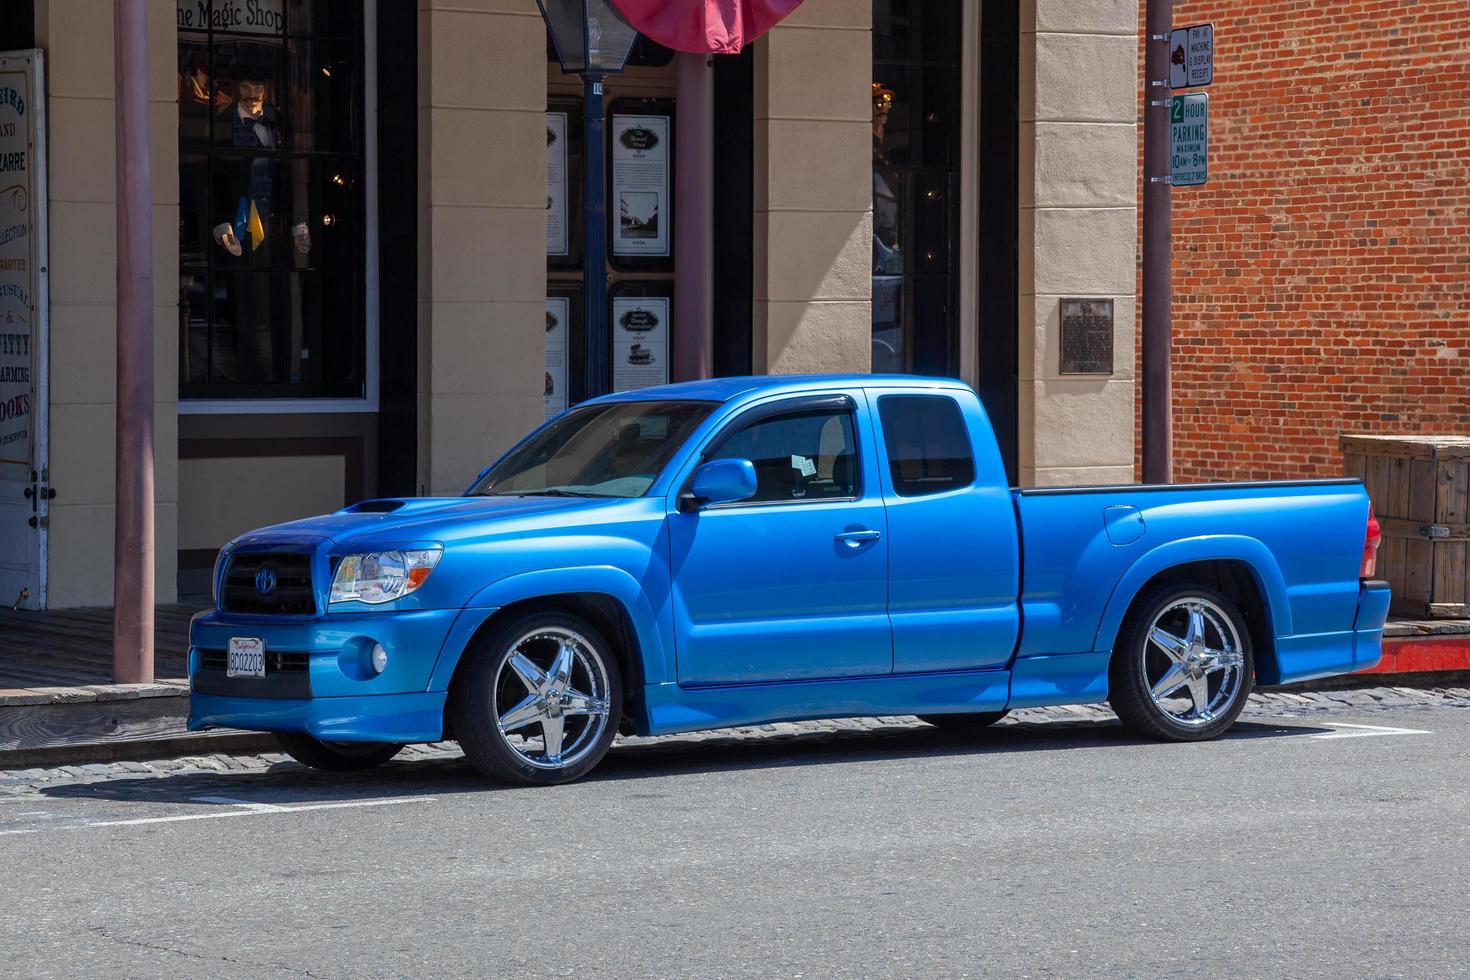 Blue pick up truck parked in Sacramento California, USA on August 5, 2011 photo